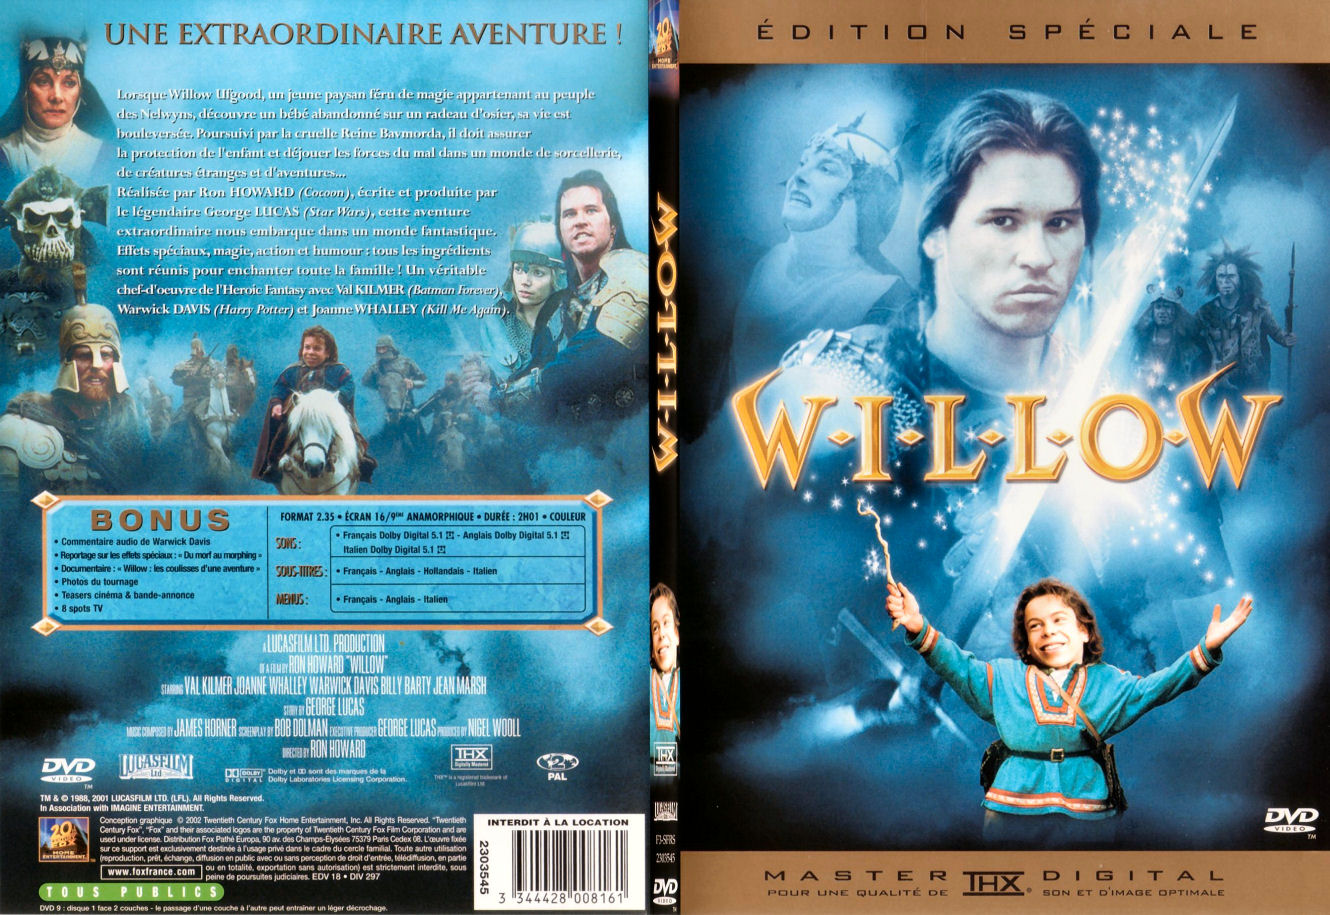 Jaquette DVD Willow - SLIM